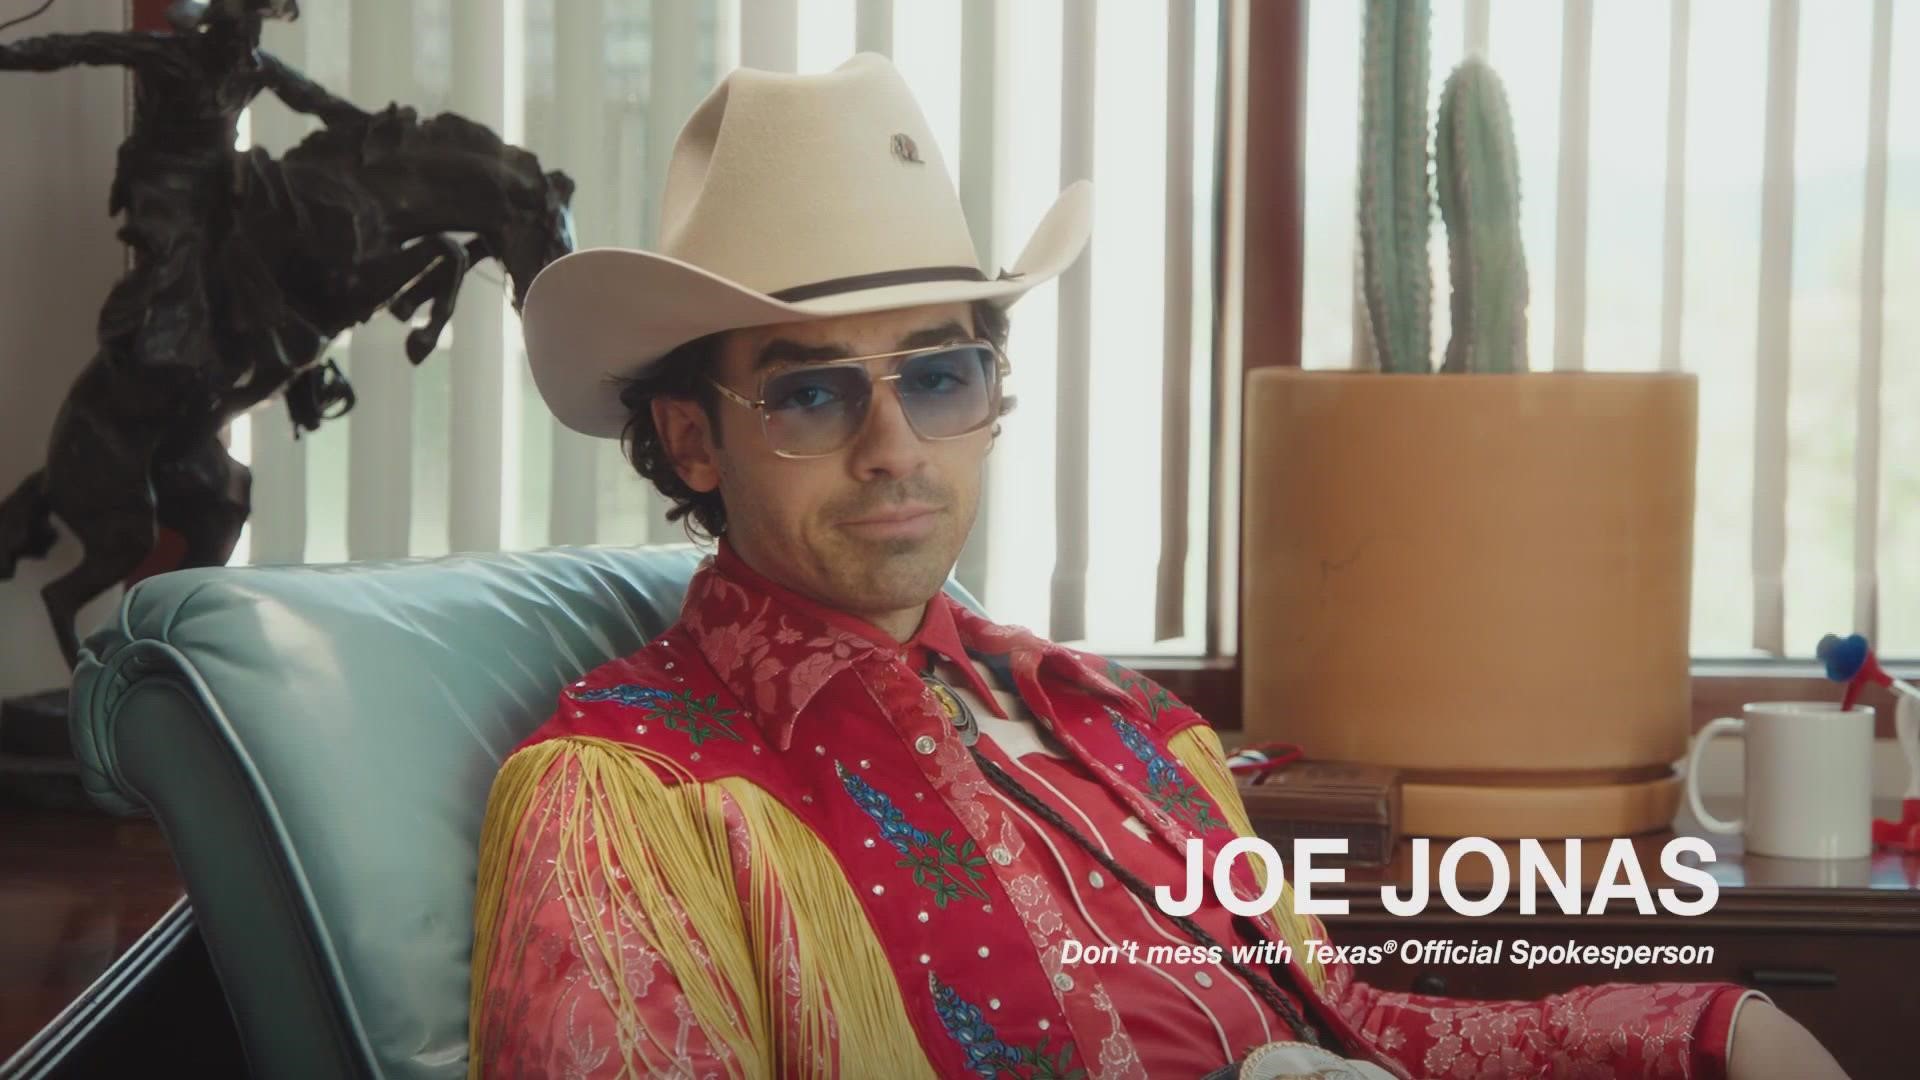 The Jonas Brother is the new famous face of the "Don't Mess With Texas" campaign, reminding people to put their trash in the trash, NOT on the ground.